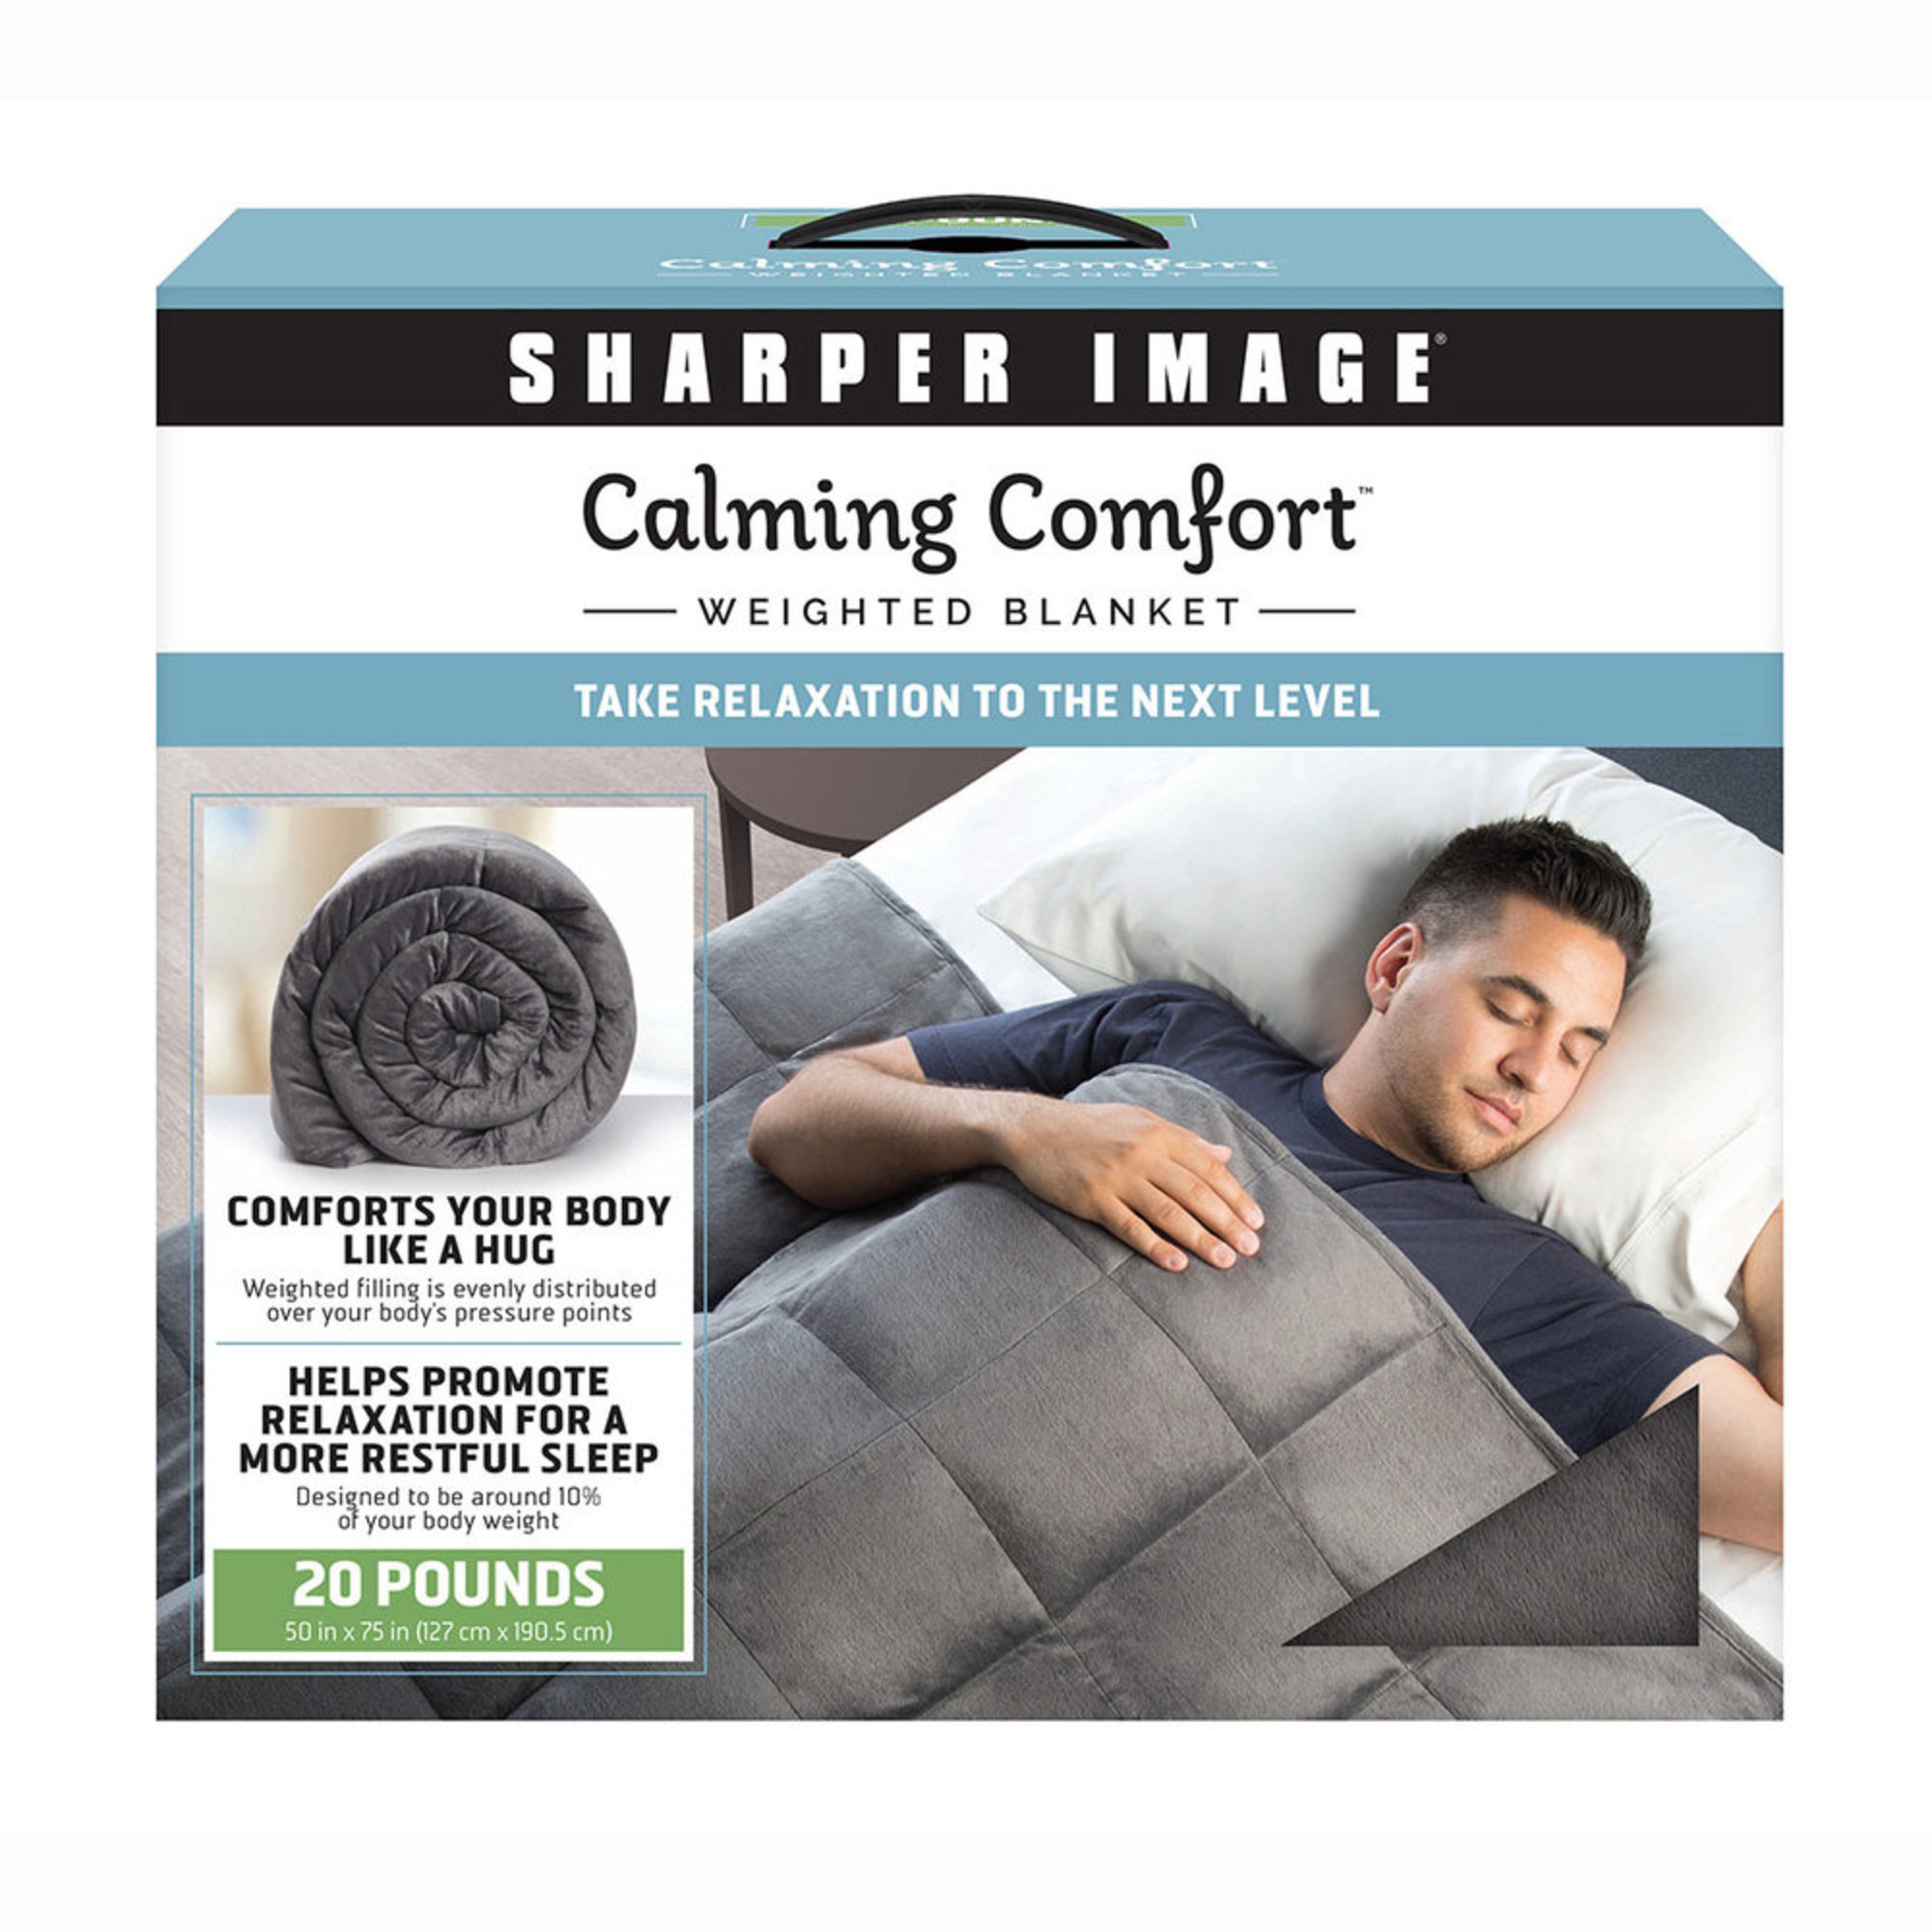 20 lb weighted blanket target